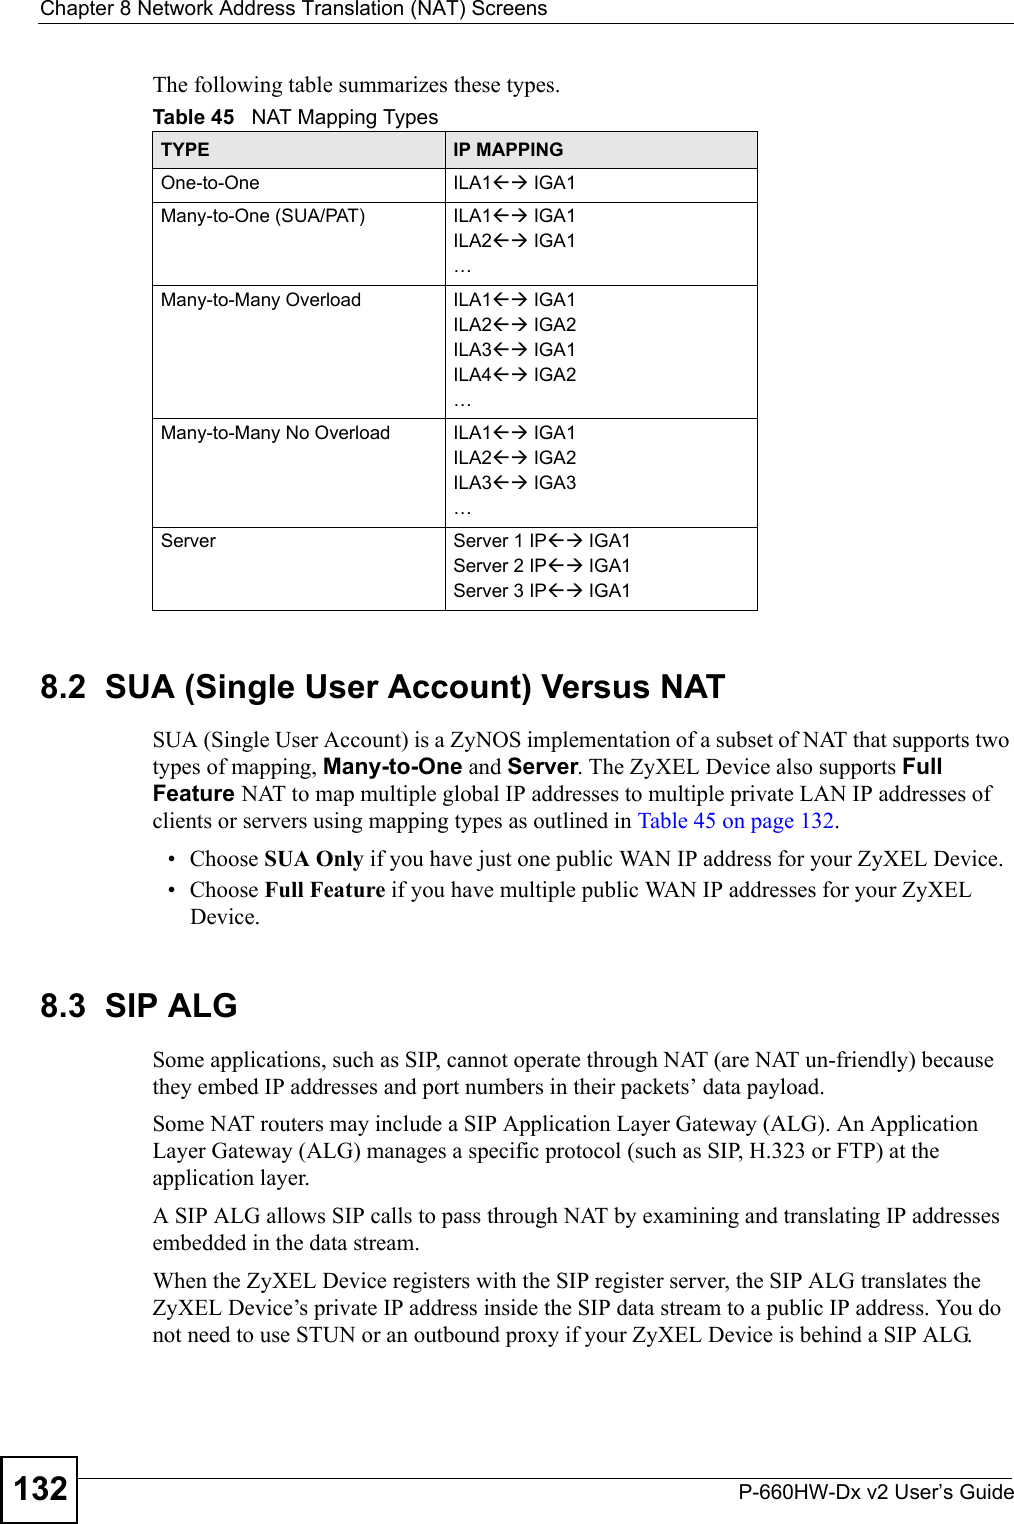 Chapter 8 Network Address Translation (NAT) ScreensP-660HW-Dx v2 User’s Guide132The following table summarizes these types.8.2  SUA (Single User Account) Versus NATSUA (Single User Account) is a ZyNOS implementation of a subset of NAT that supports two types of mapping, Many-to-One and Server. The ZyXEL Device also supports Full Feature NAT to map multiple global IP addresses to multiple private LAN IP addresses of clients or servers using mapping types as outlined in Table 45 on page 132. • Choose SUA Only if you have just one public WAN IP address for your ZyXEL Device.• Choose Full Feature if you have multiple public WAN IP addresses for your ZyXEL Device.8.3  SIP ALGSome applications, such as SIP, cannot operate through NAT (are NAT un-friendly) because they embed IP addresses and port numbers in their packets’ data payload. Some NAT routers may include a SIP Application Layer Gateway (ALG). An Application Layer Gateway (ALG) manages a specific protocol (such as SIP, H.323 or FTP) at the application layer. A SIP ALG allows SIP calls to pass through NAT by examining and translating IP addresses embedded in the data stream. When the ZyXEL Device registers with the SIP register server, the SIP ALG translates the ZyXEL Device’s private IP address inside the SIP data stream to a public IP address. You do not need to use STUN or an outbound proxy if your ZyXEL Device is behind a SIP ALG. Table 45   NAT Mapping TypesTYPE IP MAPPINGOne-to-One ILA1ÅÆ IGA1Many-to-One (SUA/PAT) ILA1ÅÆ IGA1ILA2ÅÆ IGA1…Many-to-Many Overload ILA1ÅÆ IGA1ILA2ÅÆ IGA2ILA3ÅÆ IGA1ILA4ÅÆ IGA2…Many-to-Many No Overload ILA1ÅÆ IGA1ILA2ÅÆ IGA2ILA3ÅÆ IGA3…Server Server 1 IPÅÆ IGA1Server 2 IPÅÆ IGA1Server 3 IPÅÆ IGA1